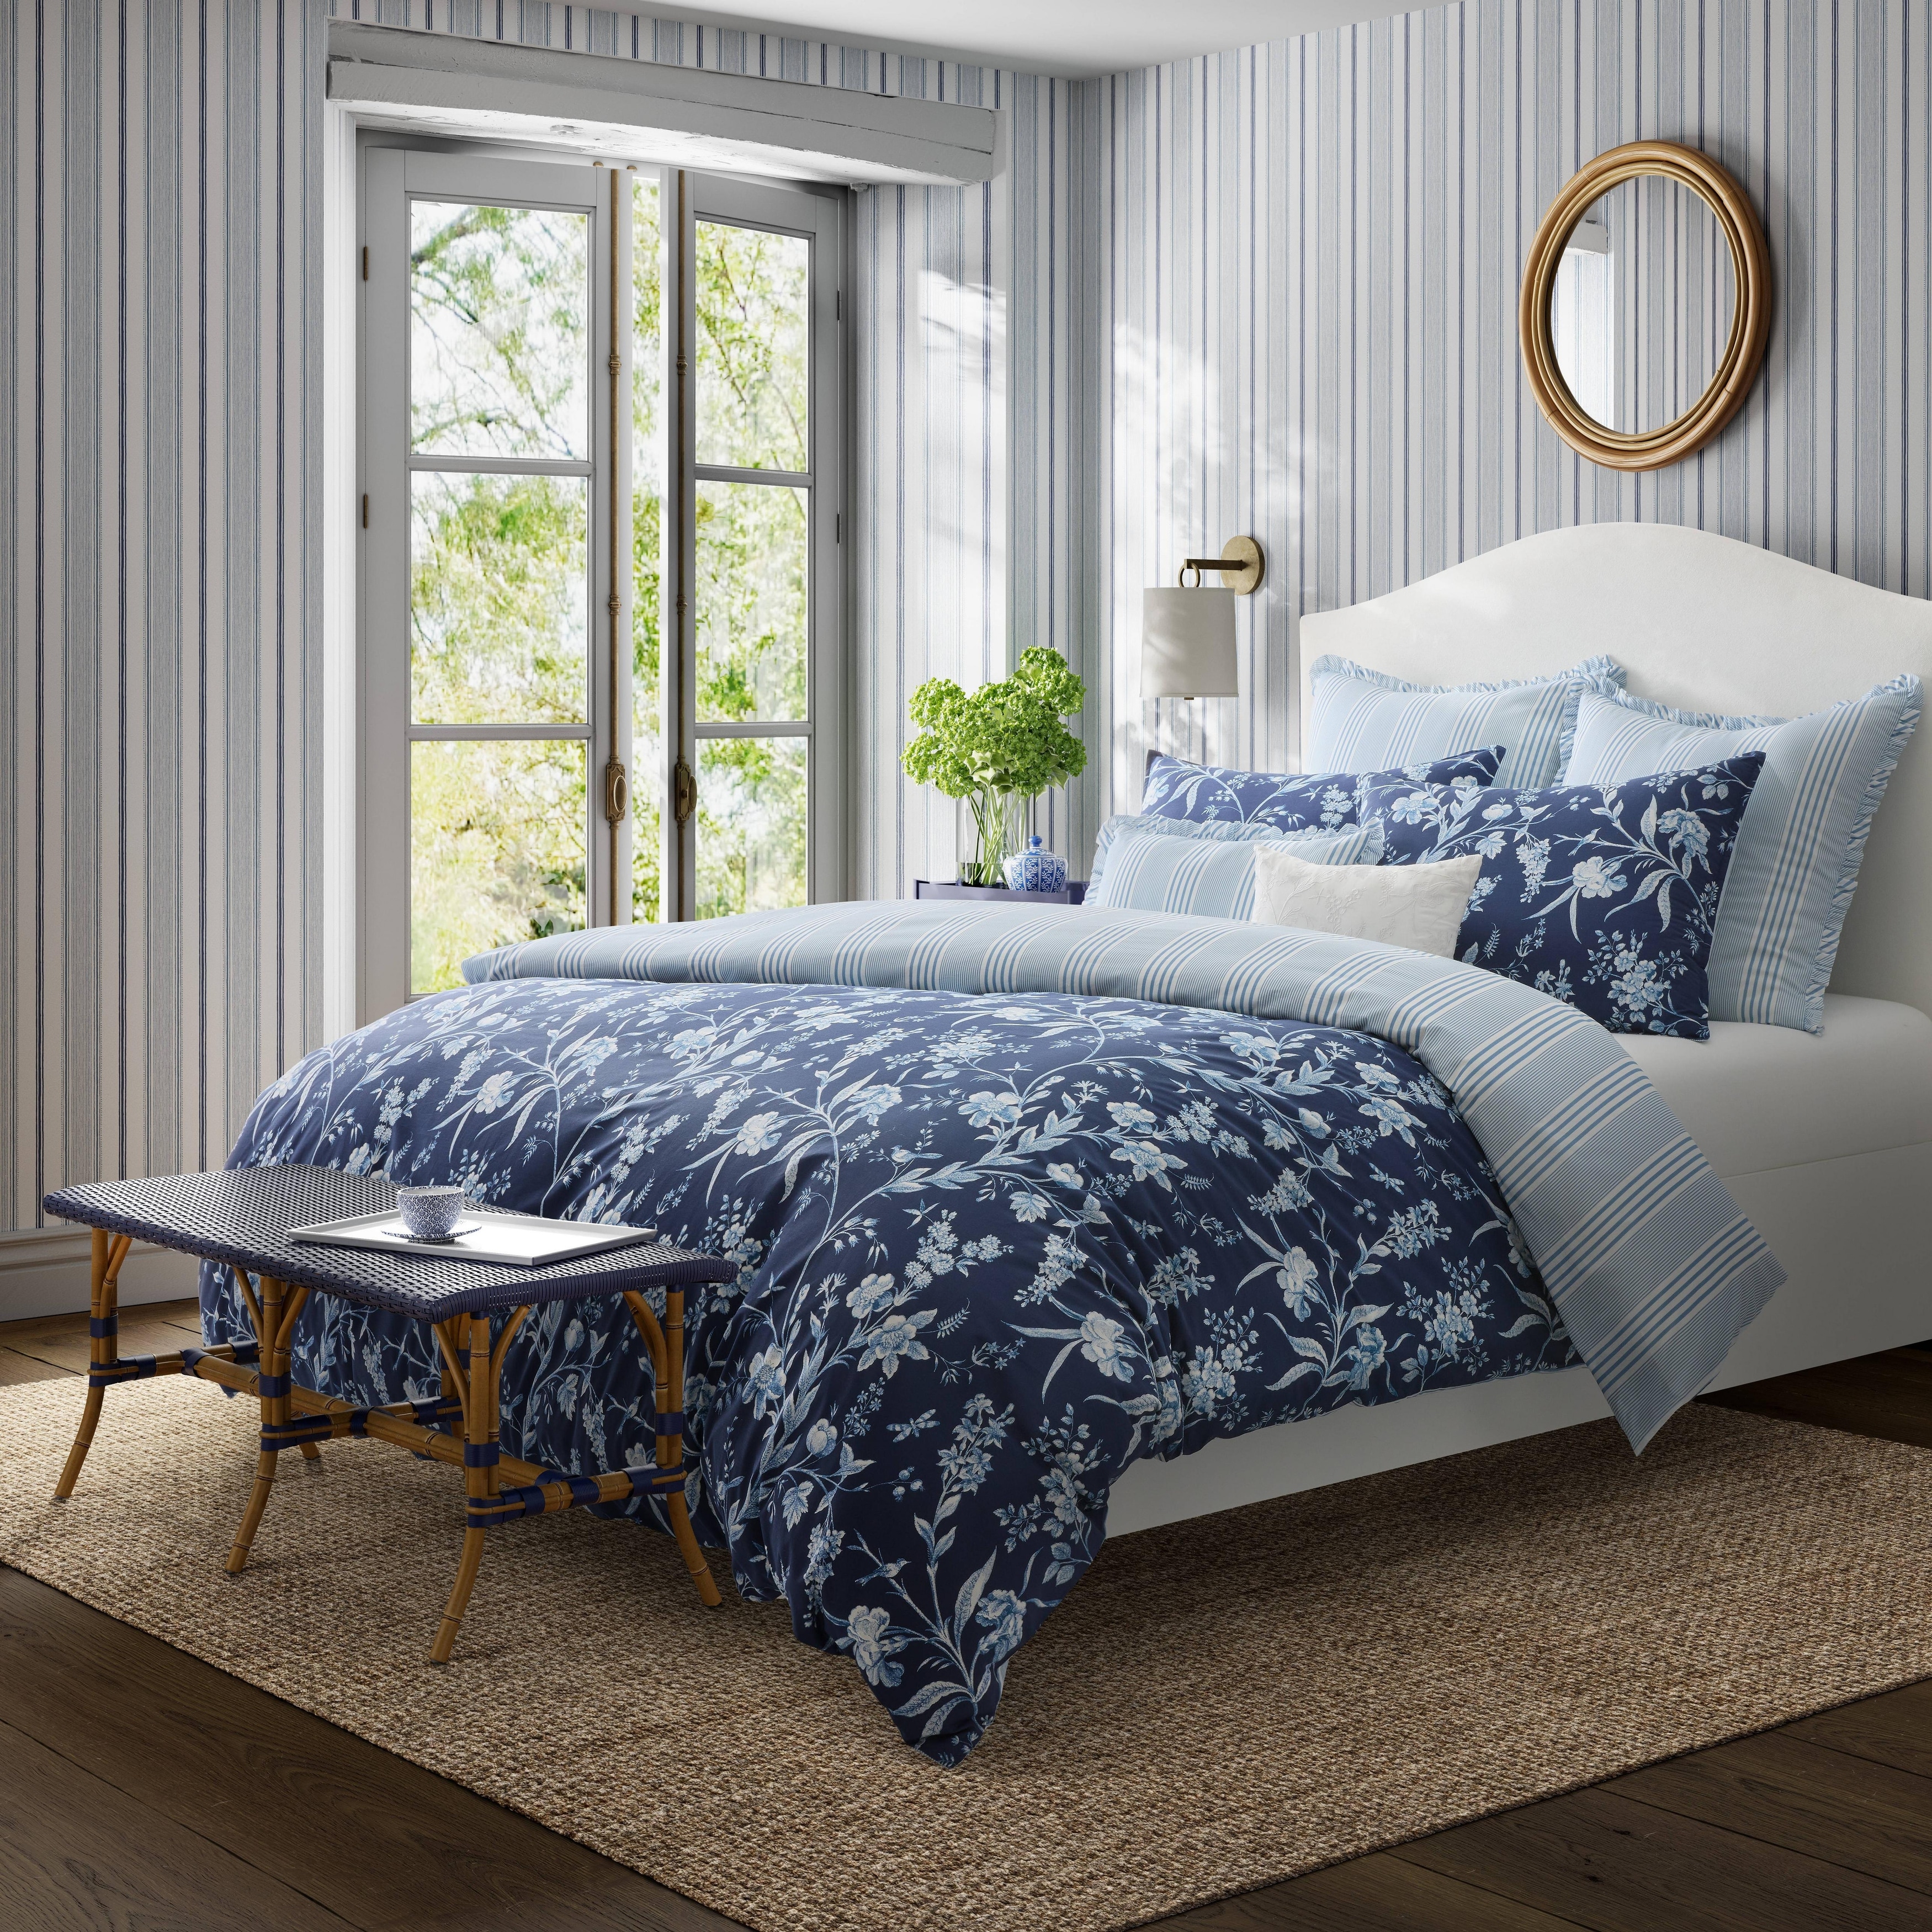 Shabby Chic, Floral Comforters and Sets - Bed Bath & Beyond